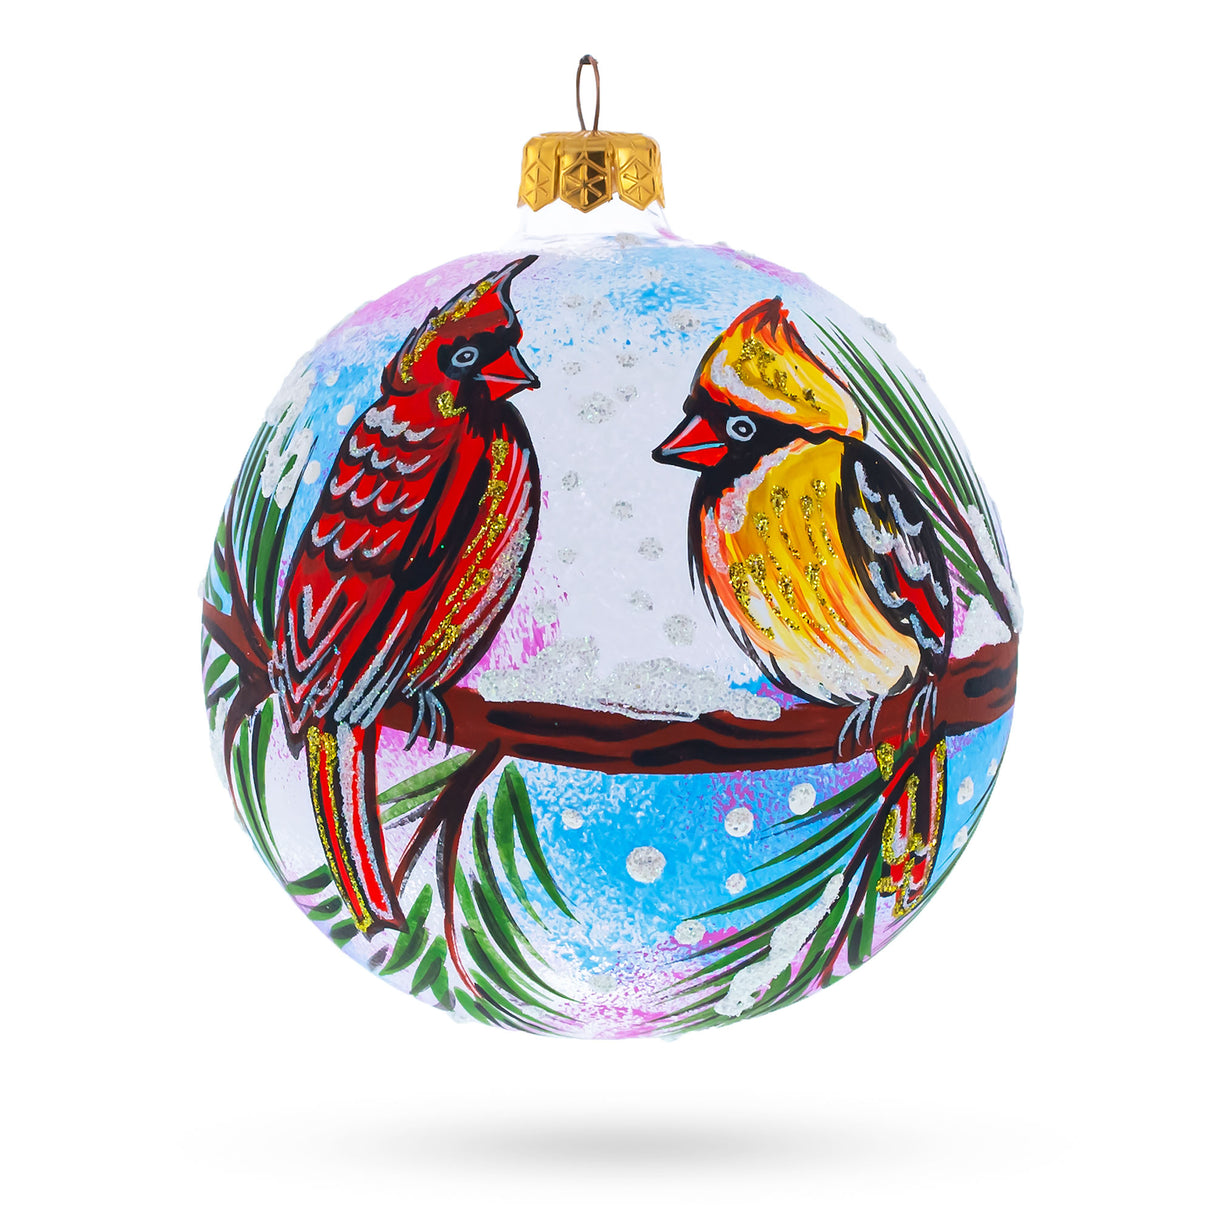 Winter Wonderland Duo: Two Cardinals in Snowy Scenery Blown Glass Ball Christmas Ornament 4 Inches in Multi color, Round shape